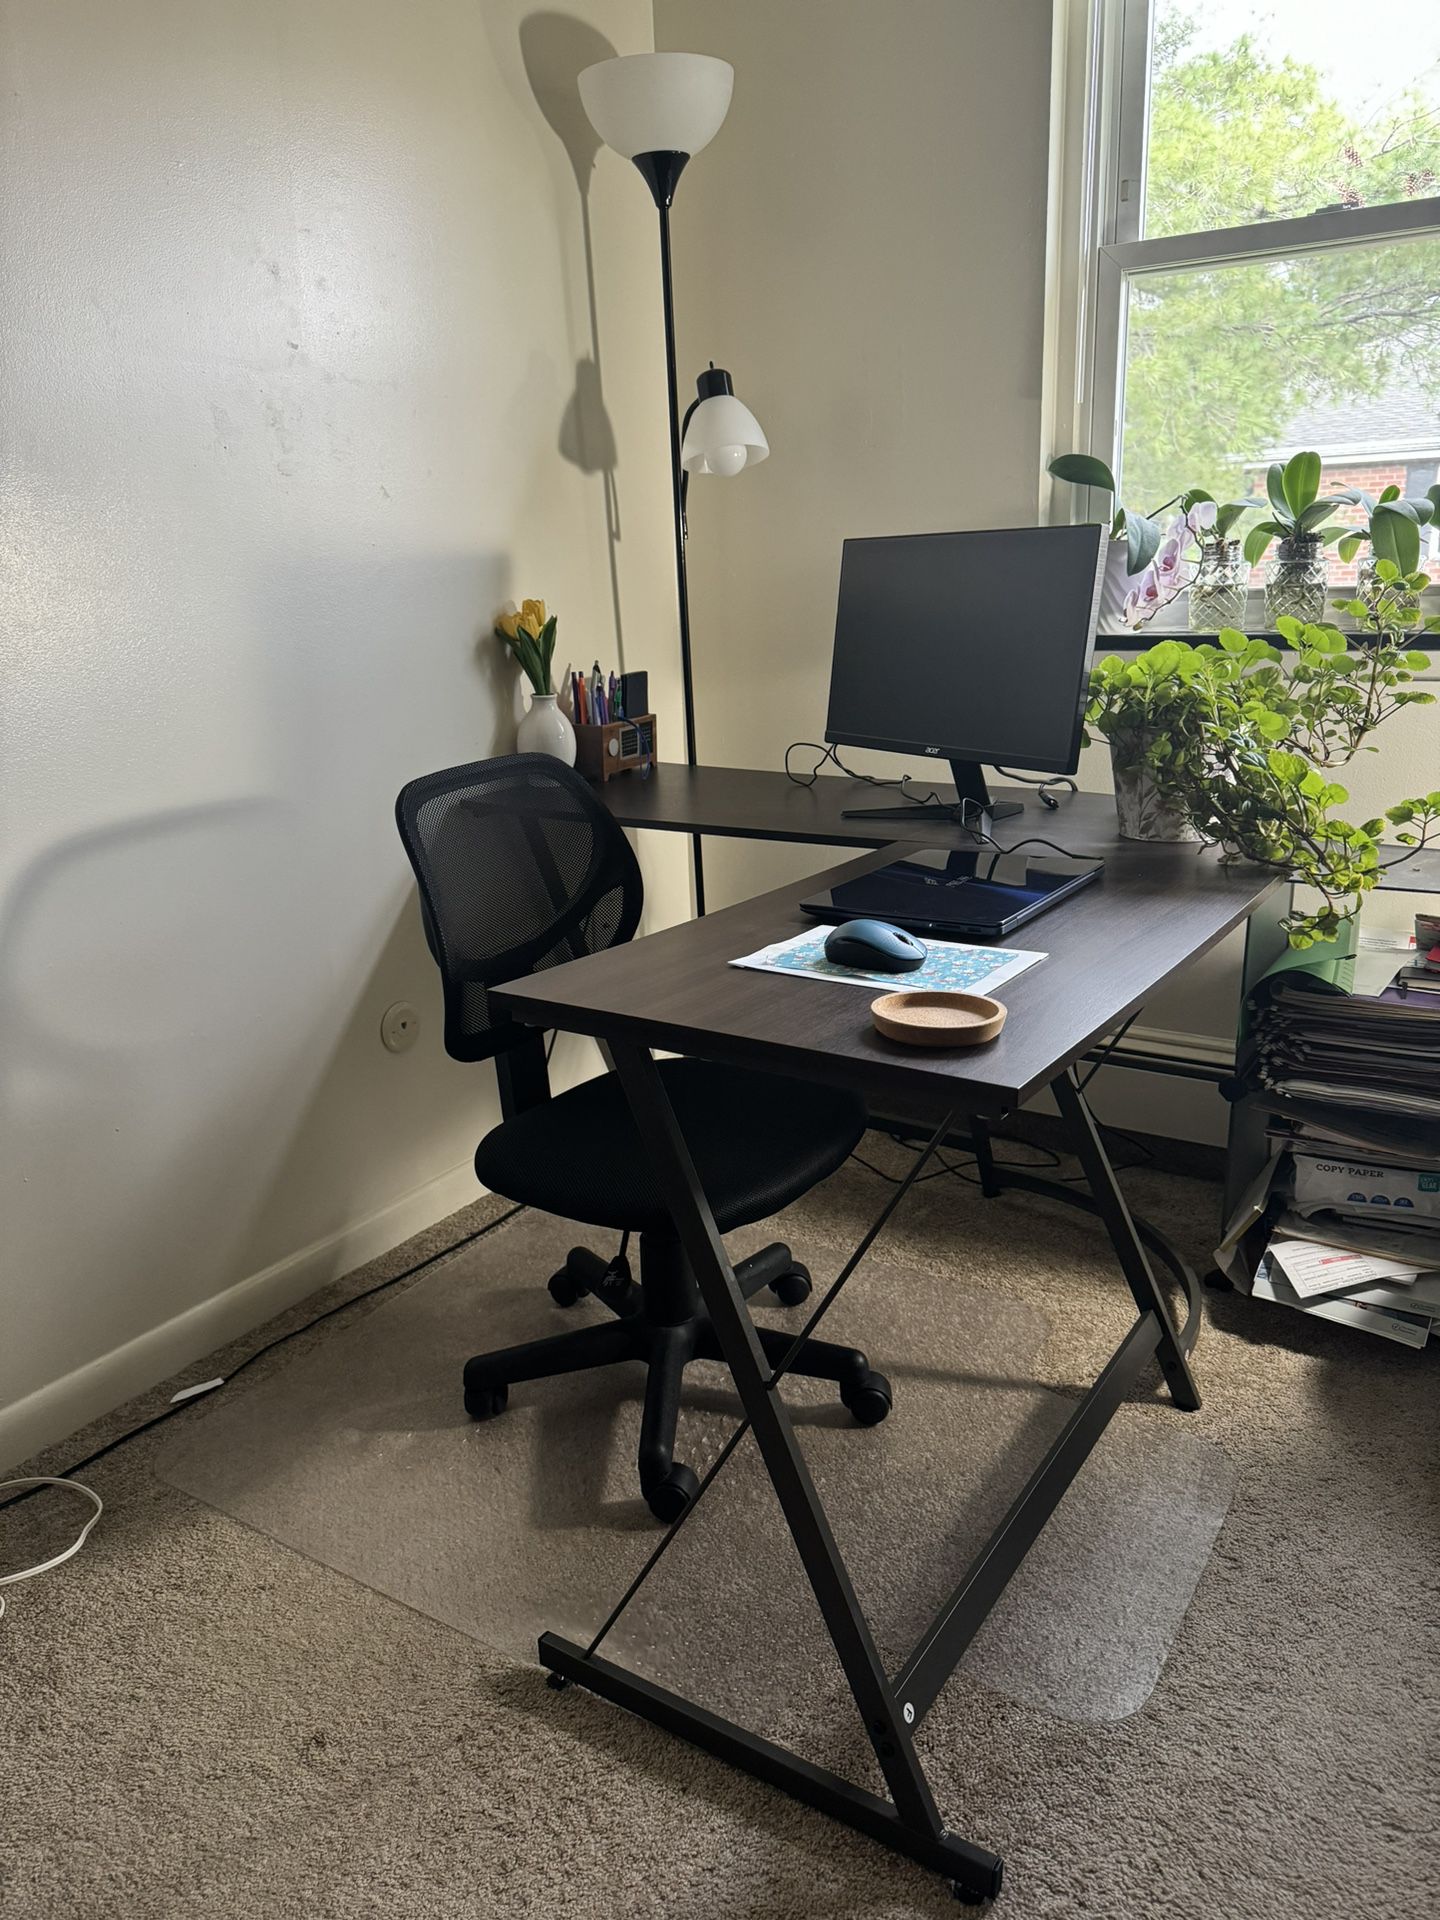 Office Desk and Office Desk Chair